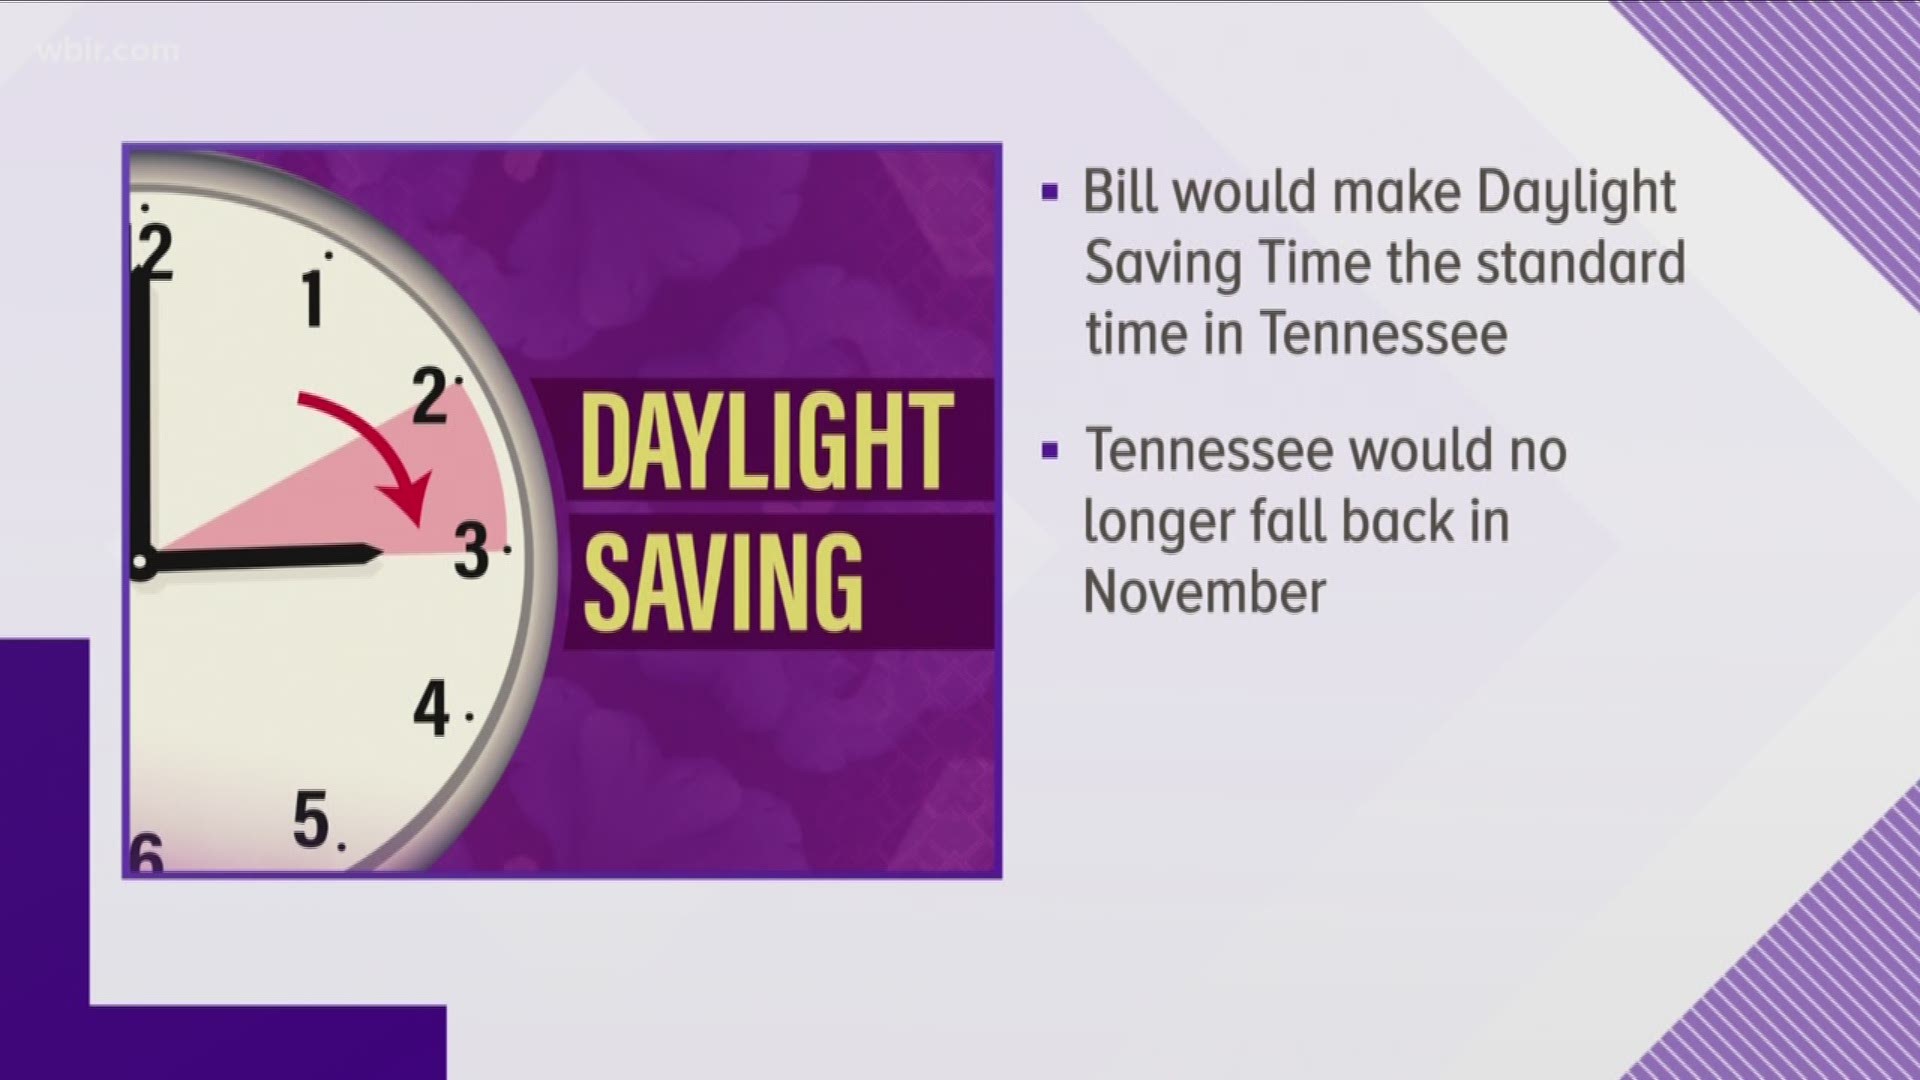 Daylight Saving Time bill passes in Tennessee House, awaiting Senate